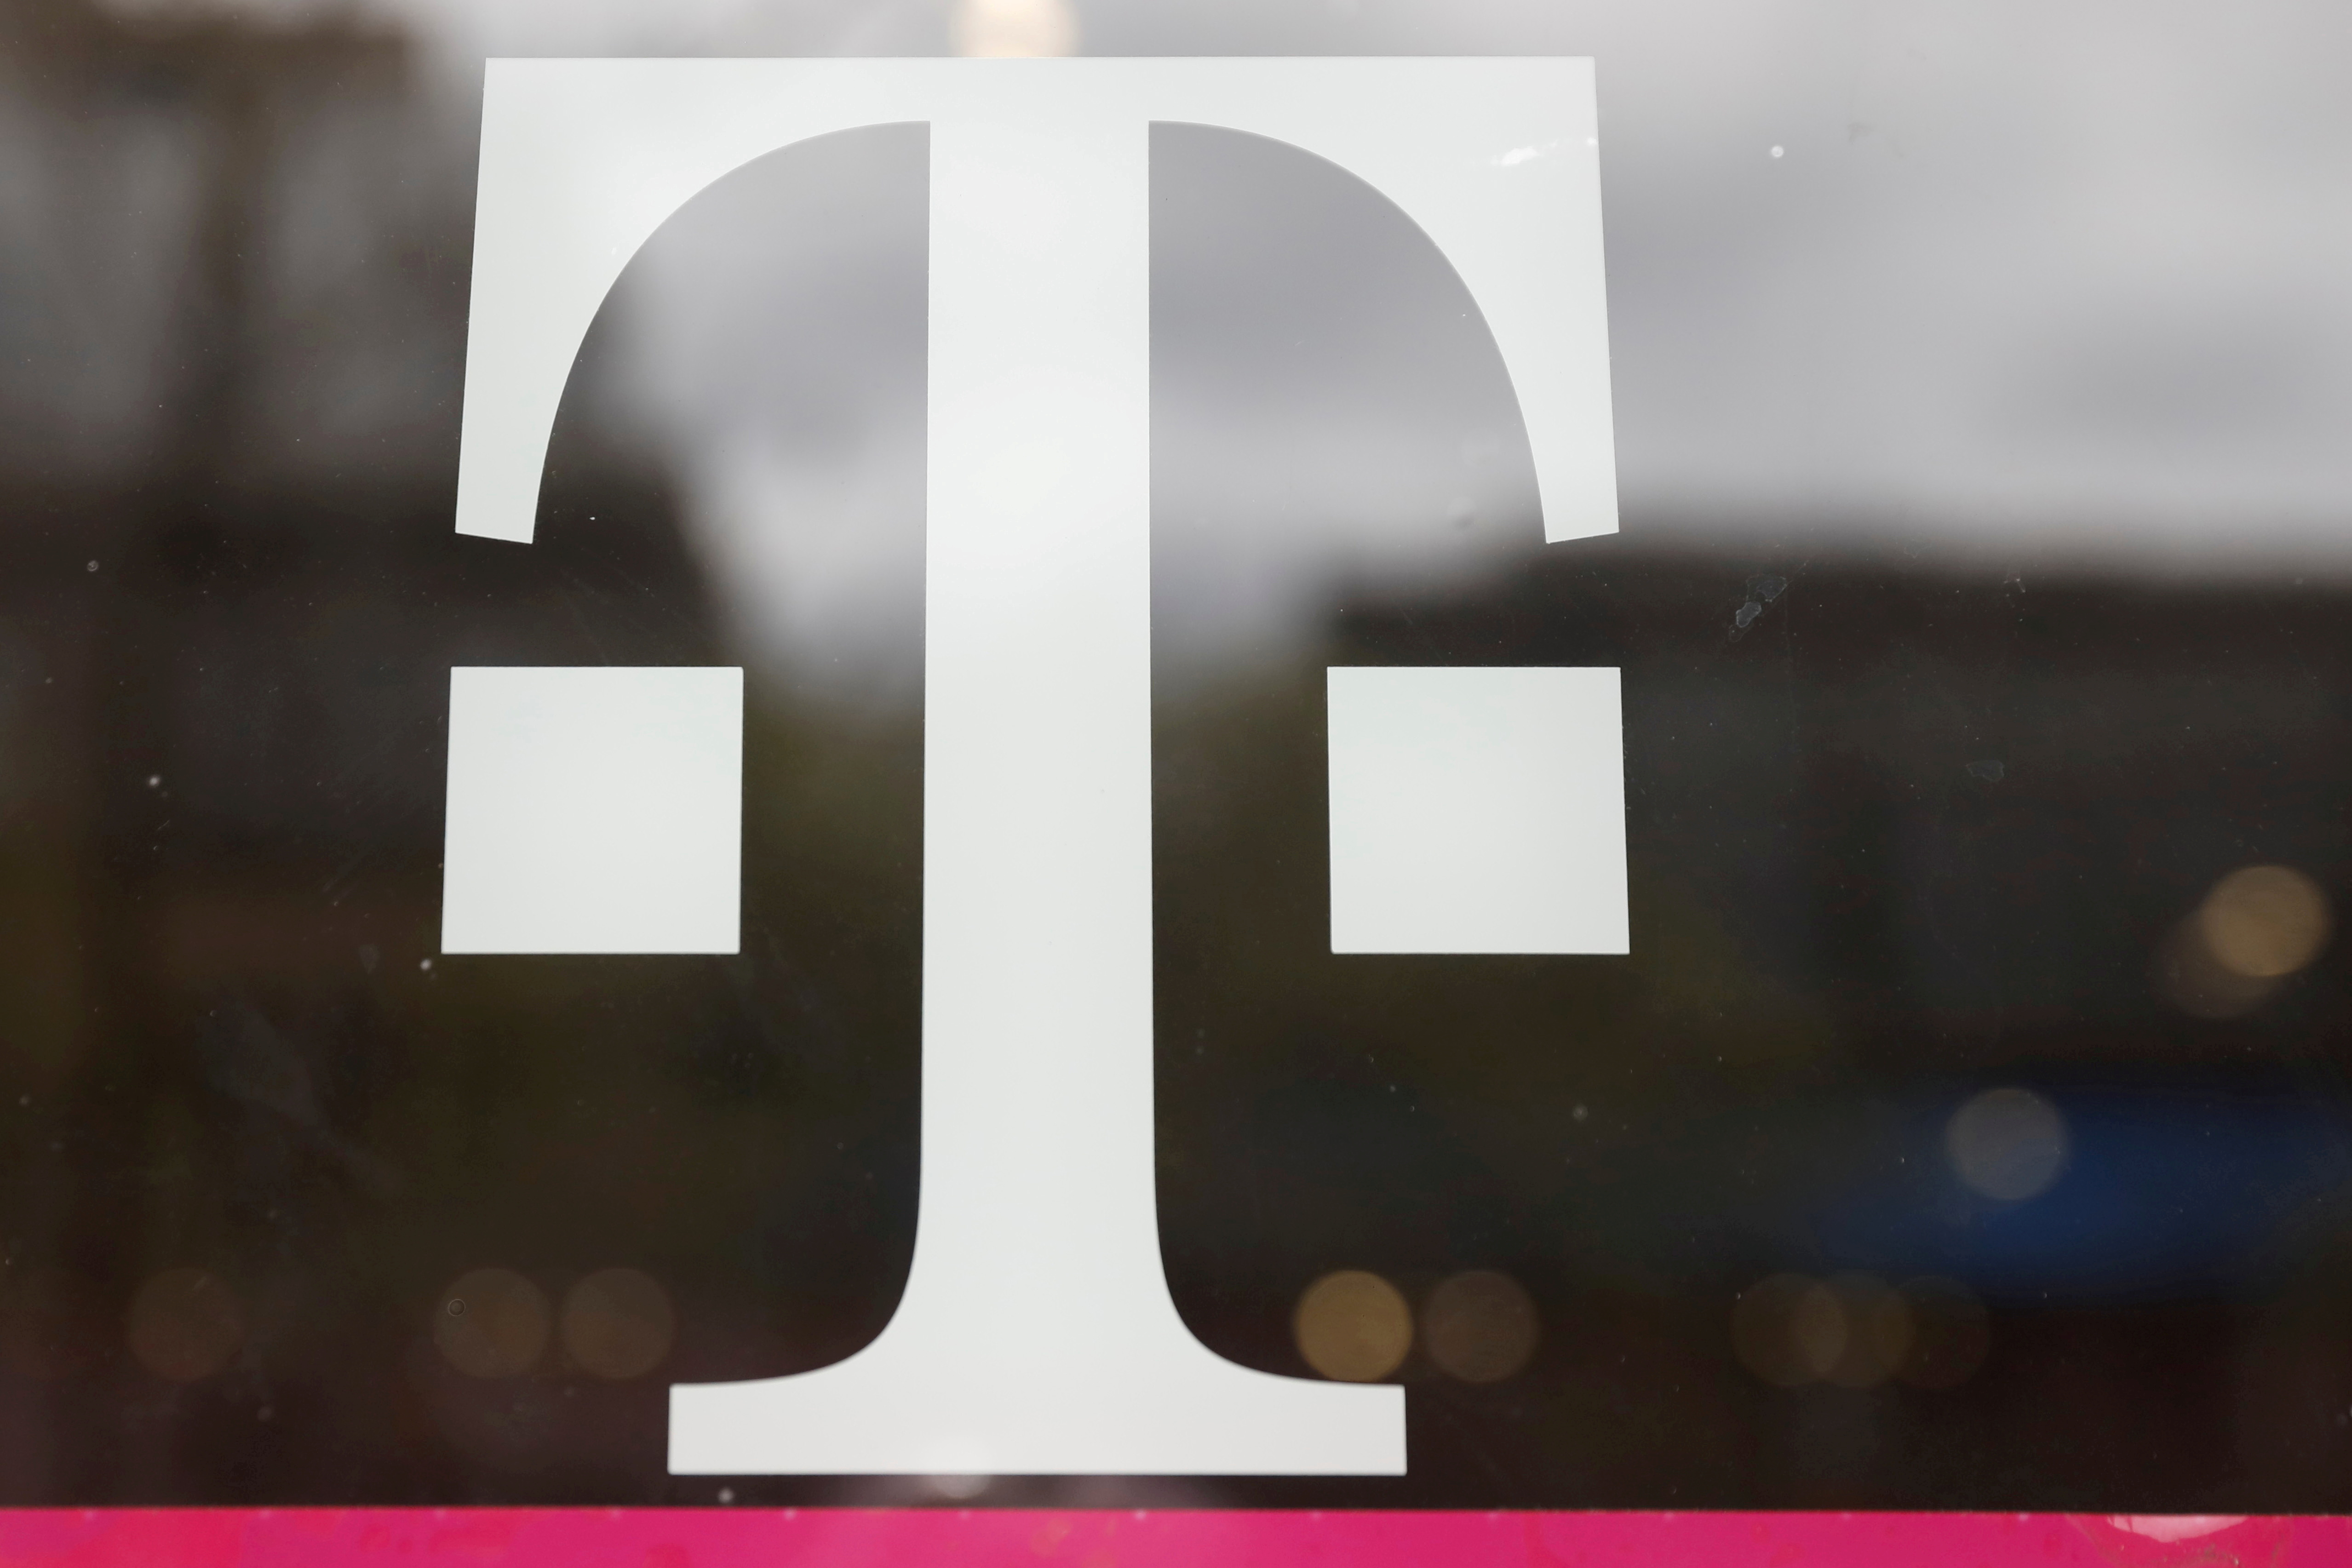  A T-Mobile logo is seen on the storefront door of a store in Manhattan, New York, U.S., April 30, 2018. REUTERS/Shannon Stapleton